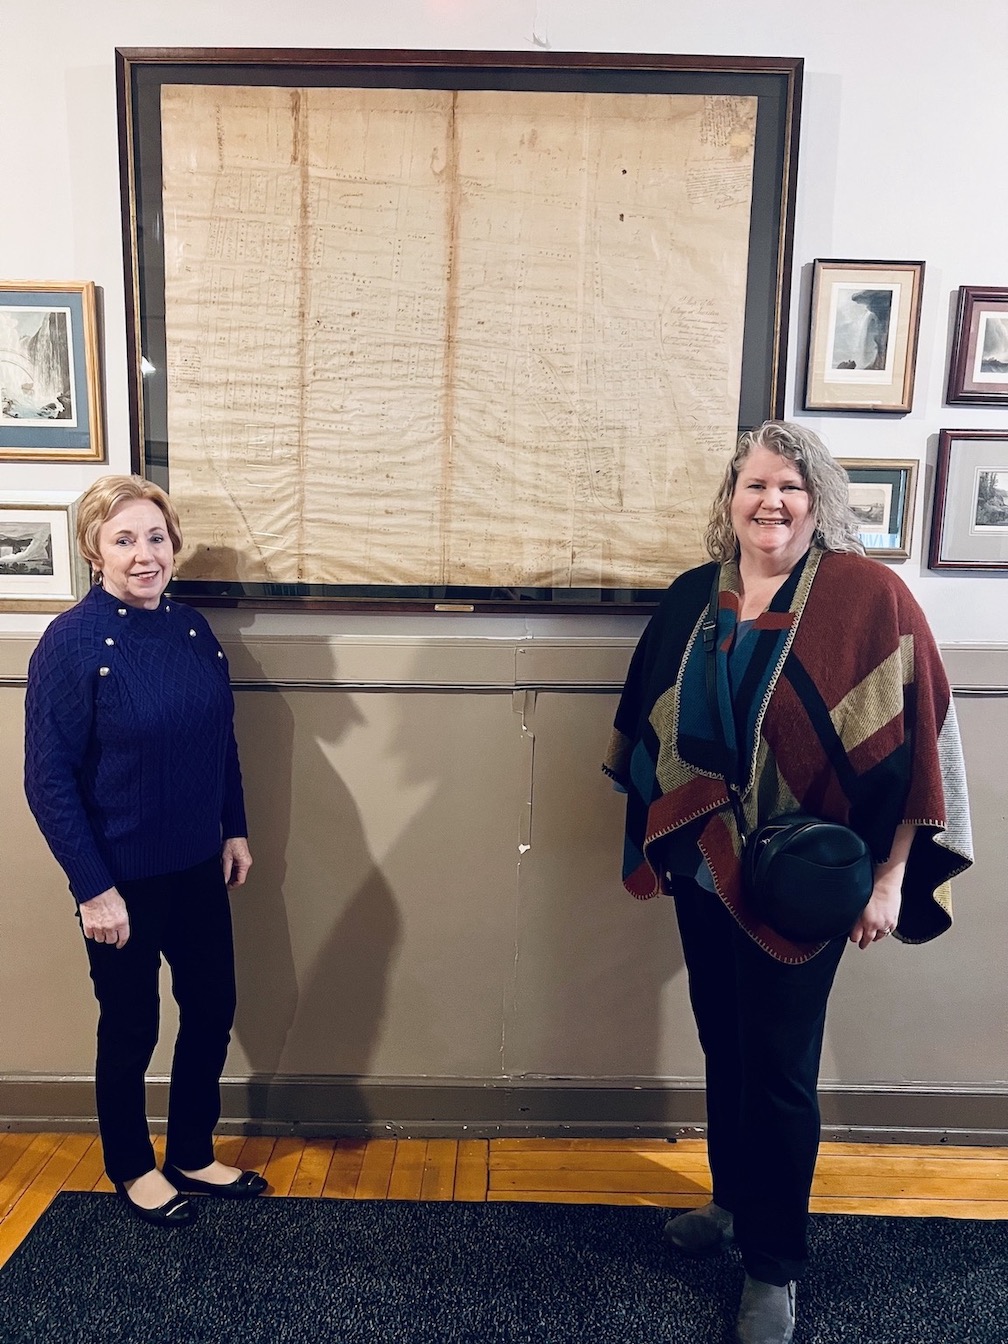 Village of Lewiston Mayor Anne Welch is shown with Mary Helen Miskuly in front of the historic Lewiston map in the main hallway of the Red Brick Municipal Building, 145 N. Fourth St. The map was donated by Peter Barton Hutt, and is framed with a special ultraviolet Plexiglas. (Submitted)